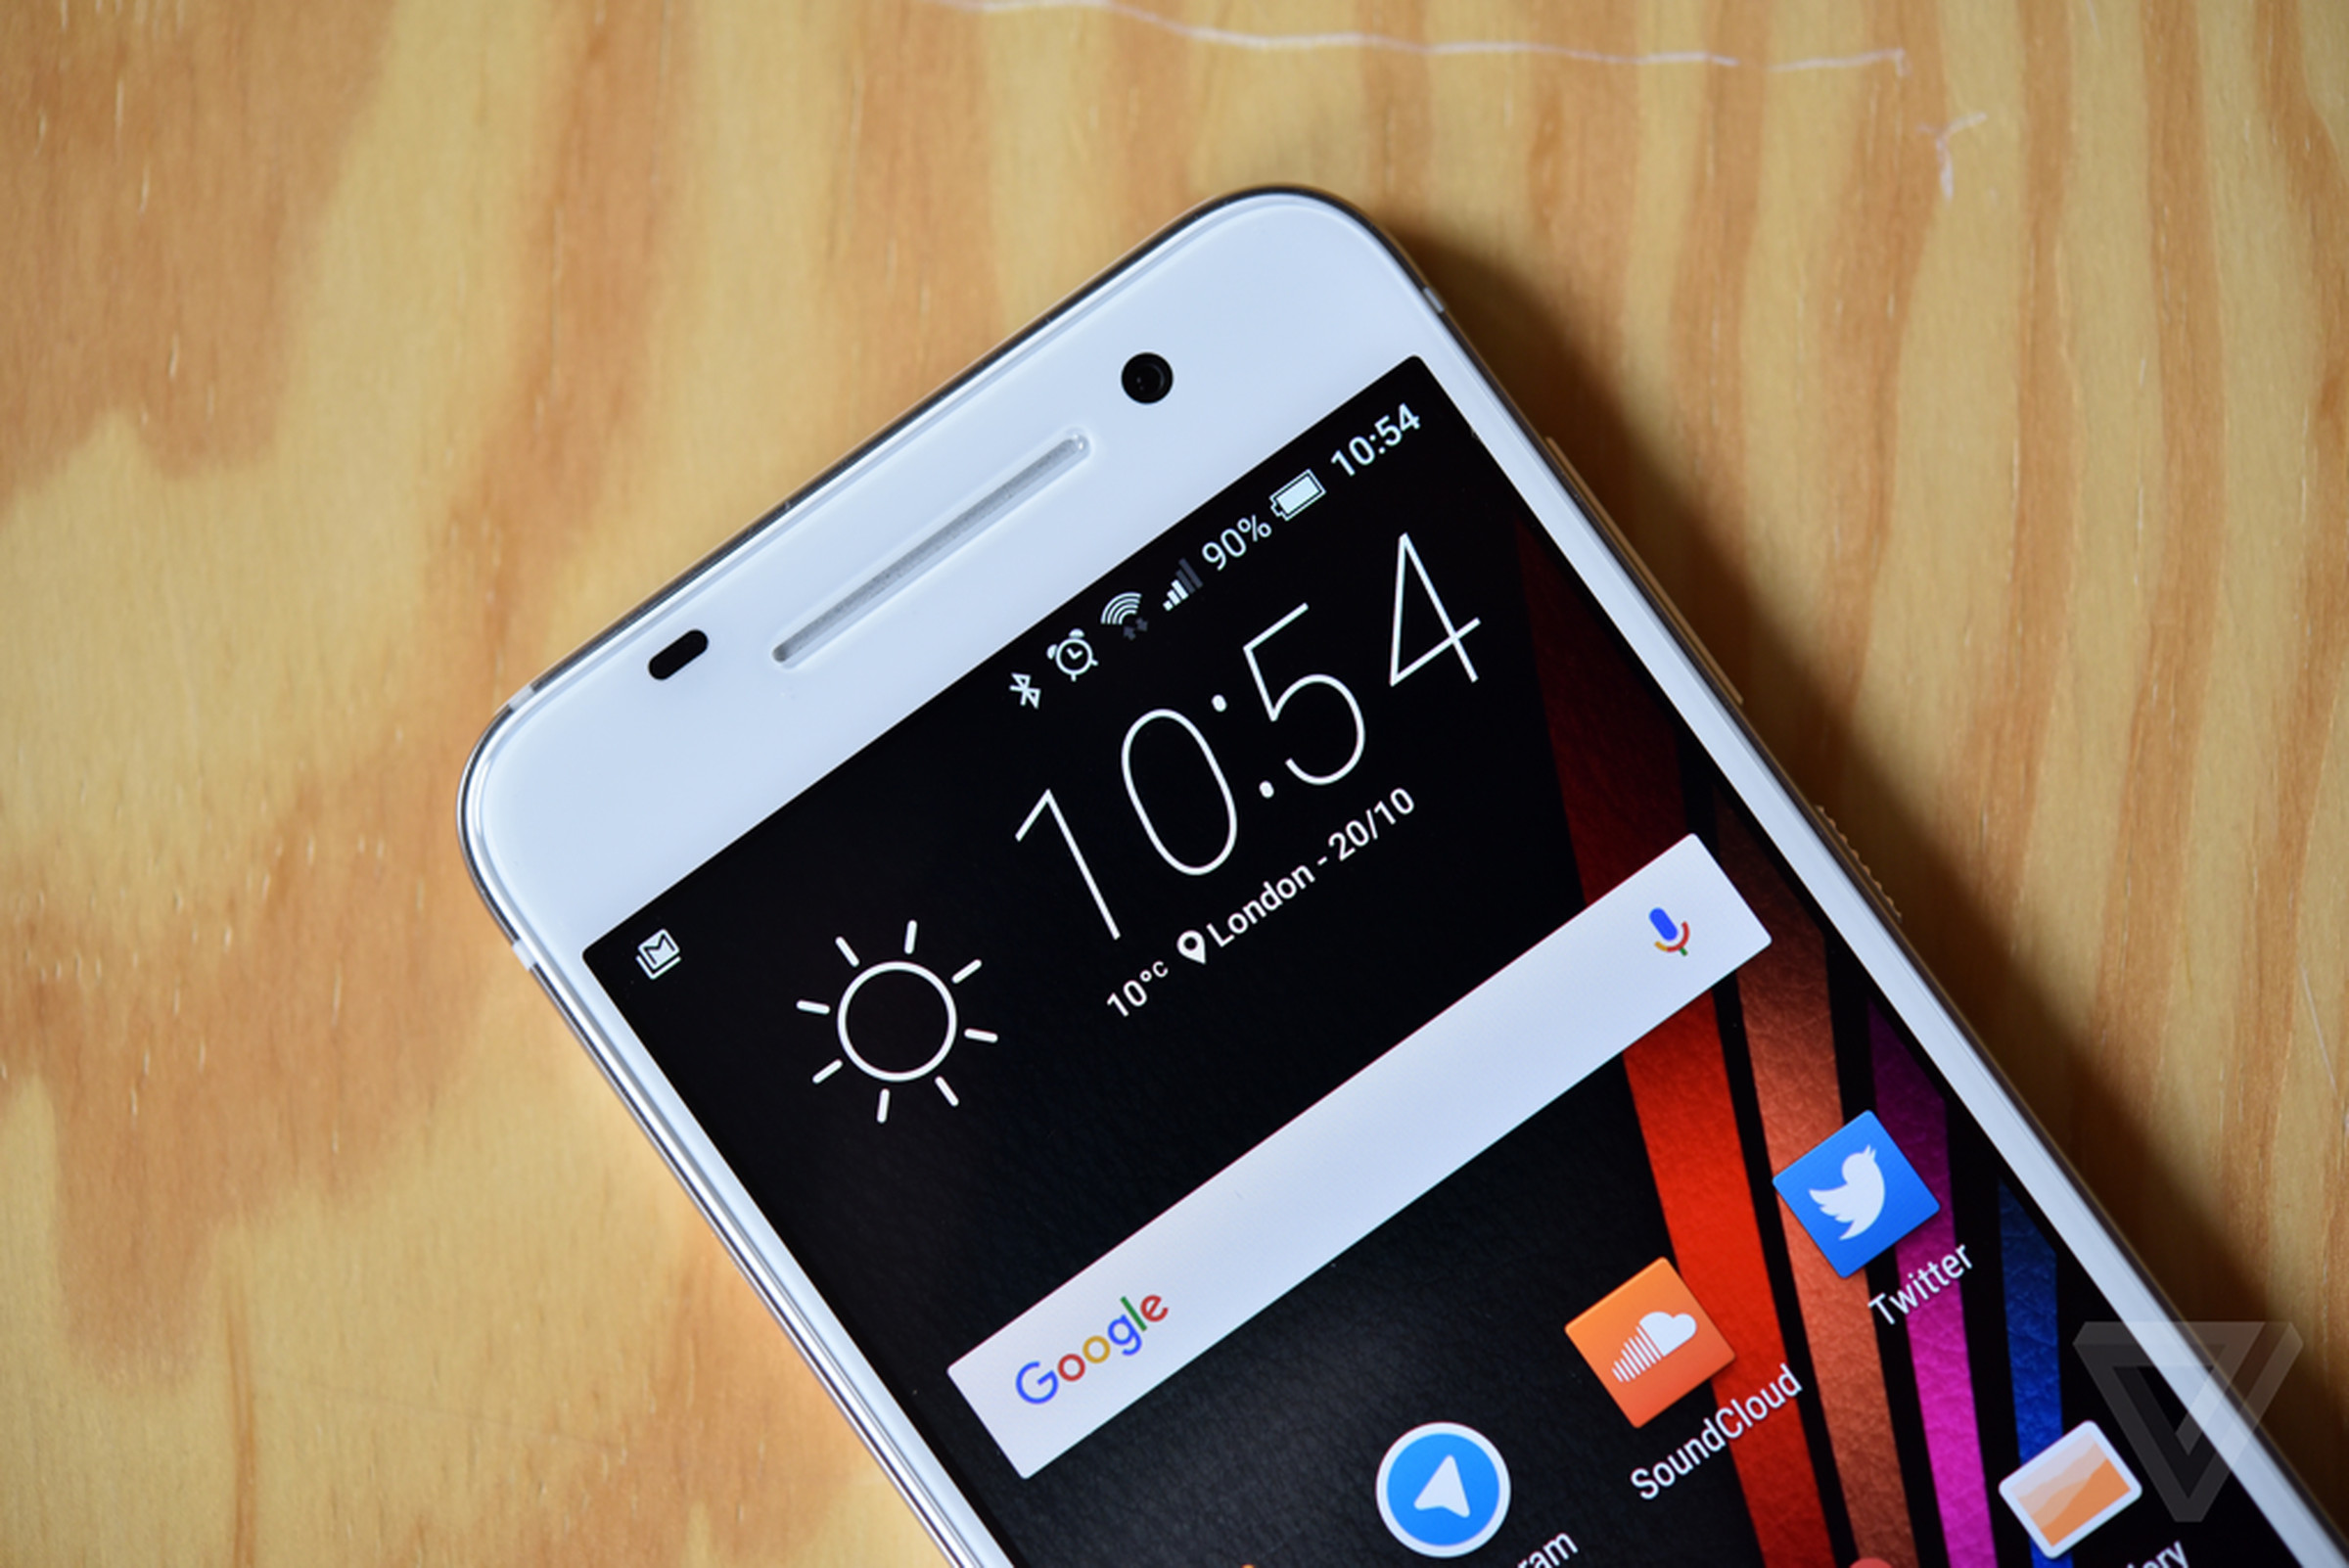 HTC One A9 hands-on photos